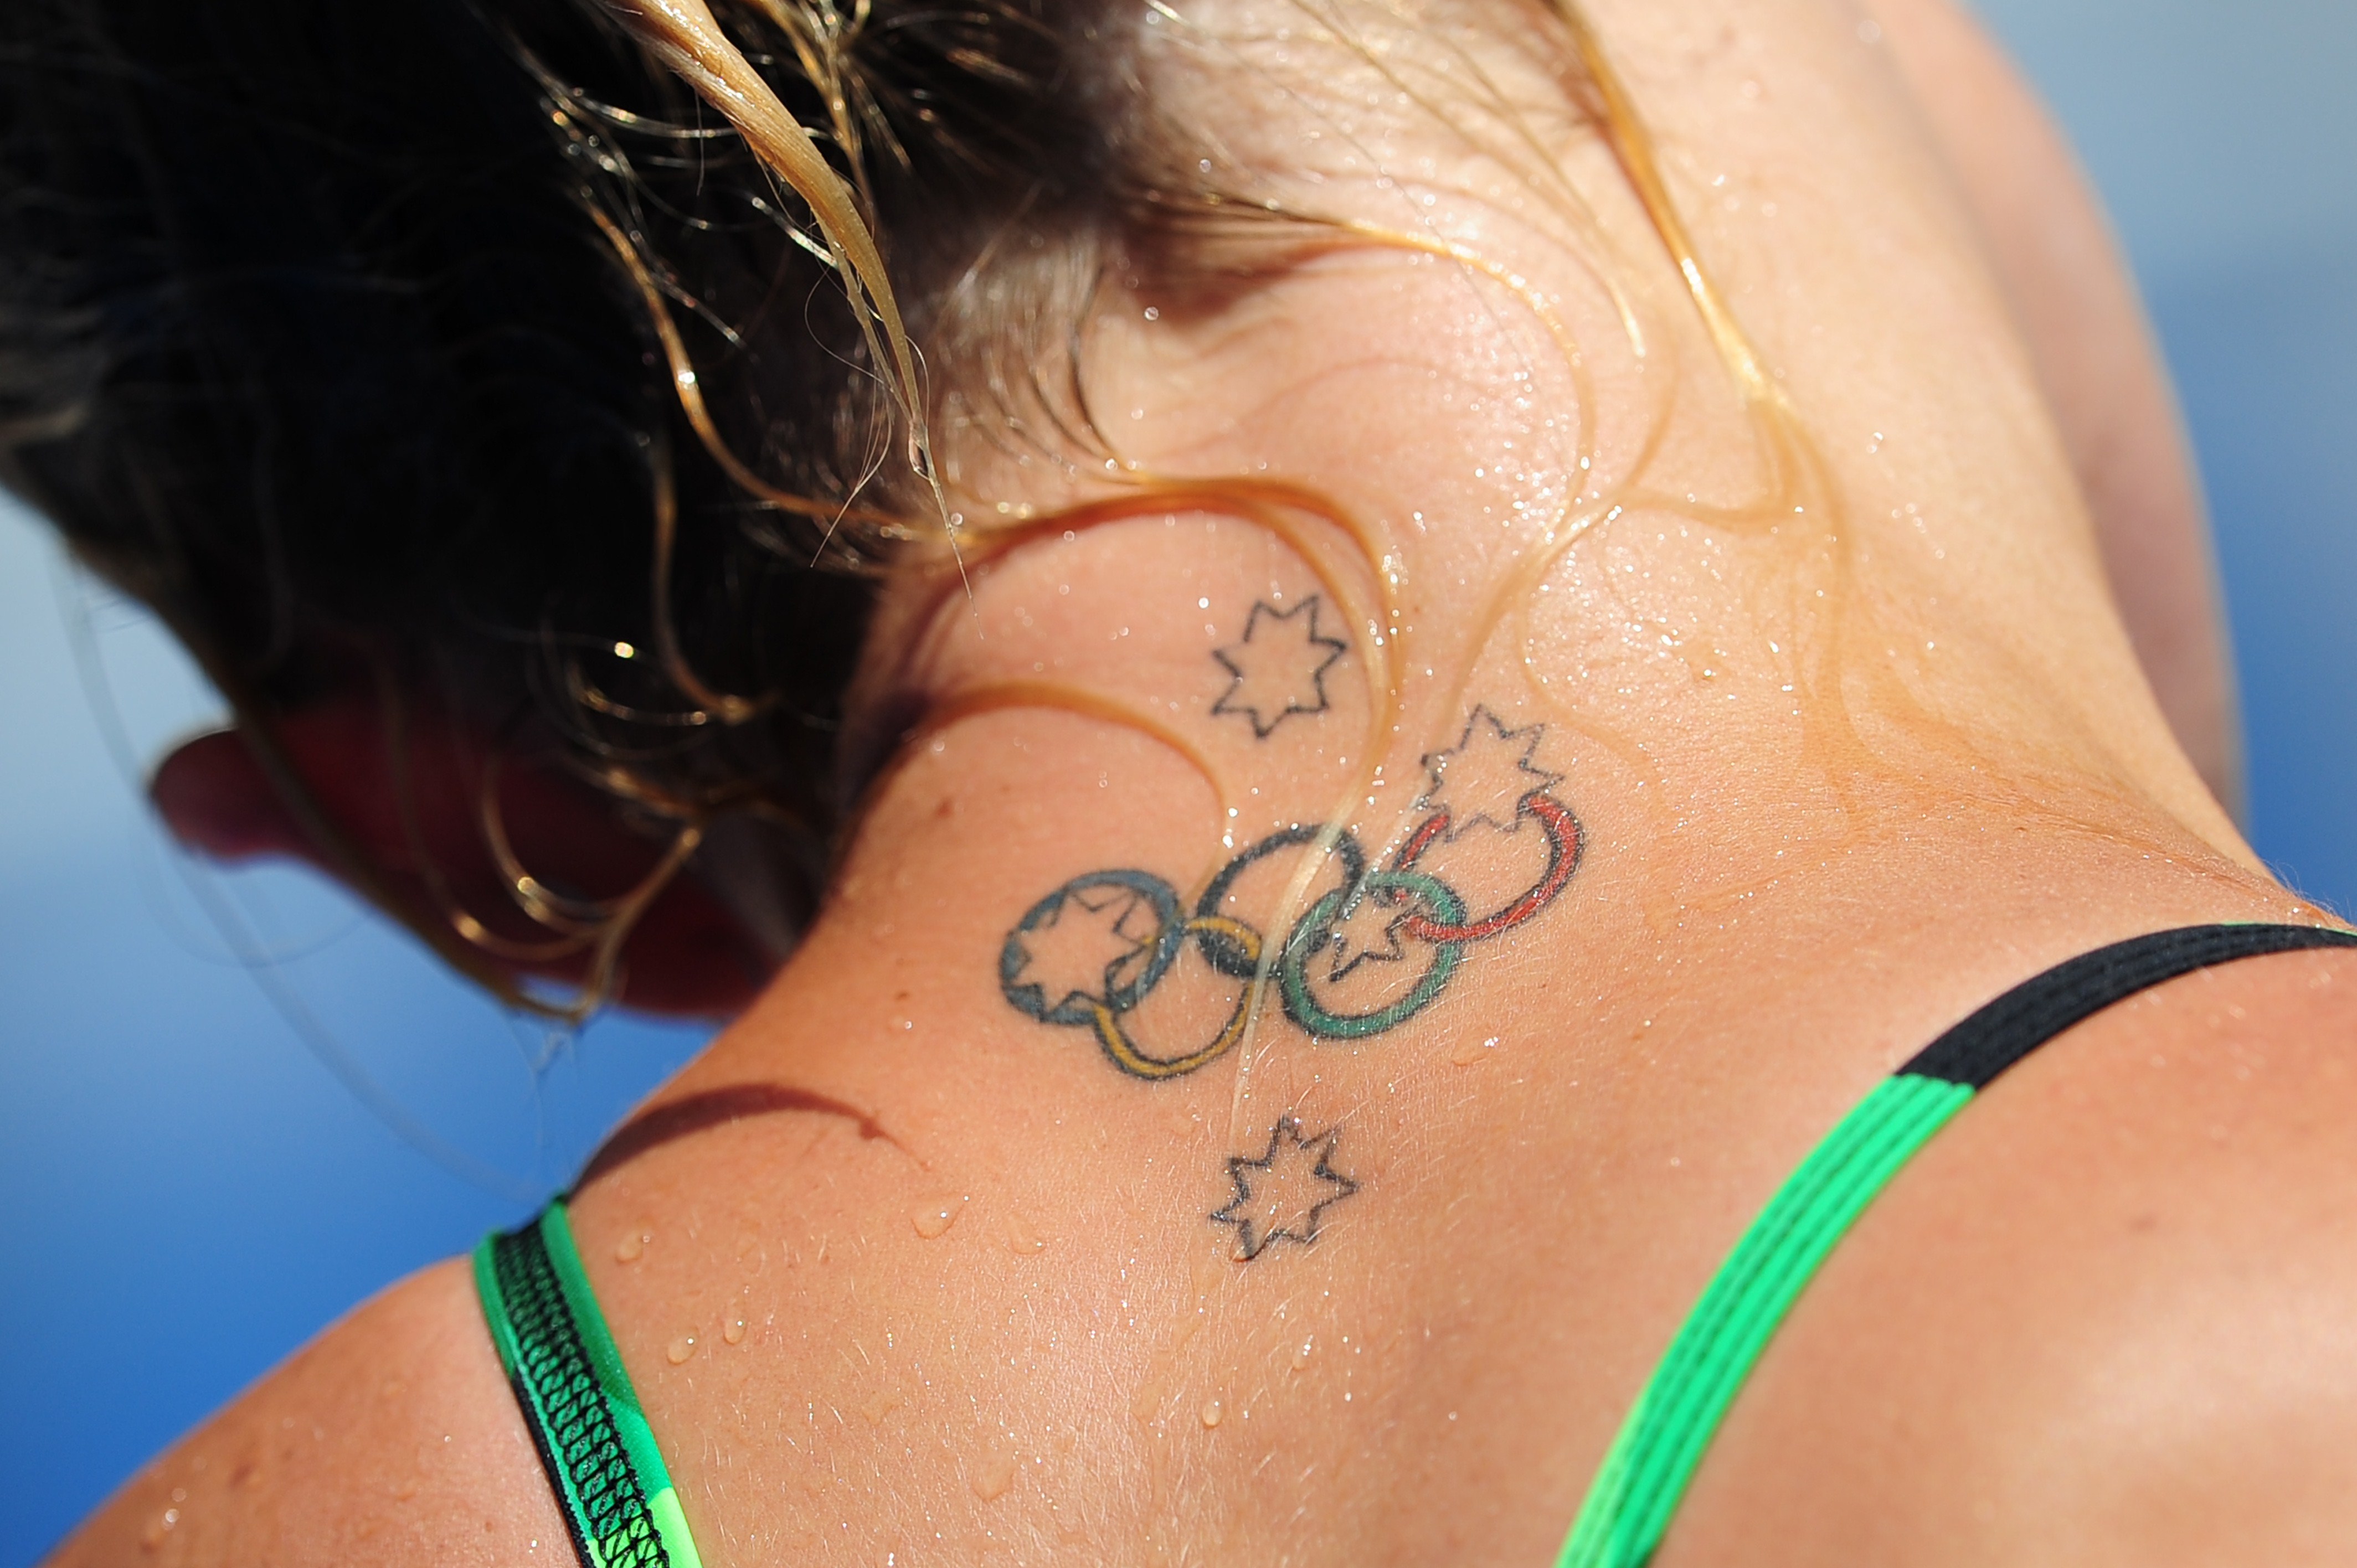 When Did You Start Being Allowed To Show Your Tattoos At The Olympics?